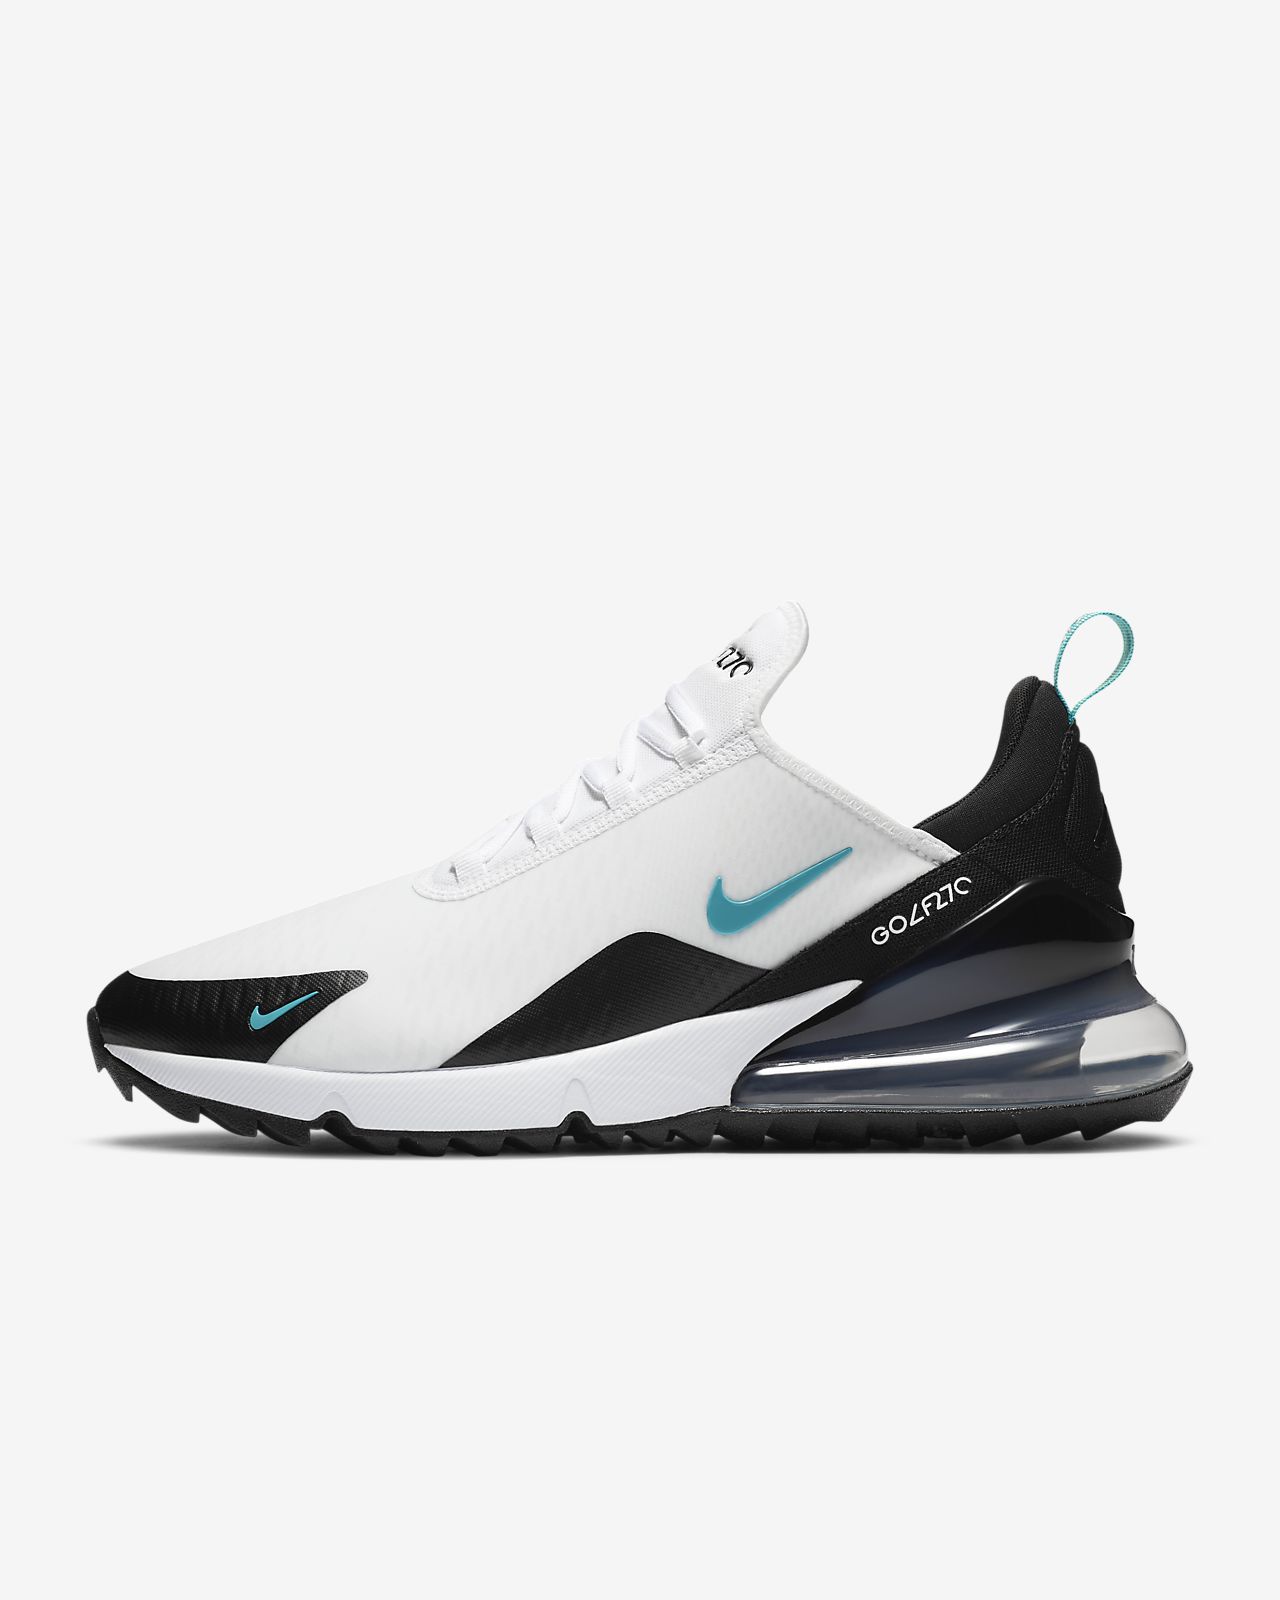 [NIKE Official]Nike Air Max 270 G Golf Shoe.Online store (mail order site)